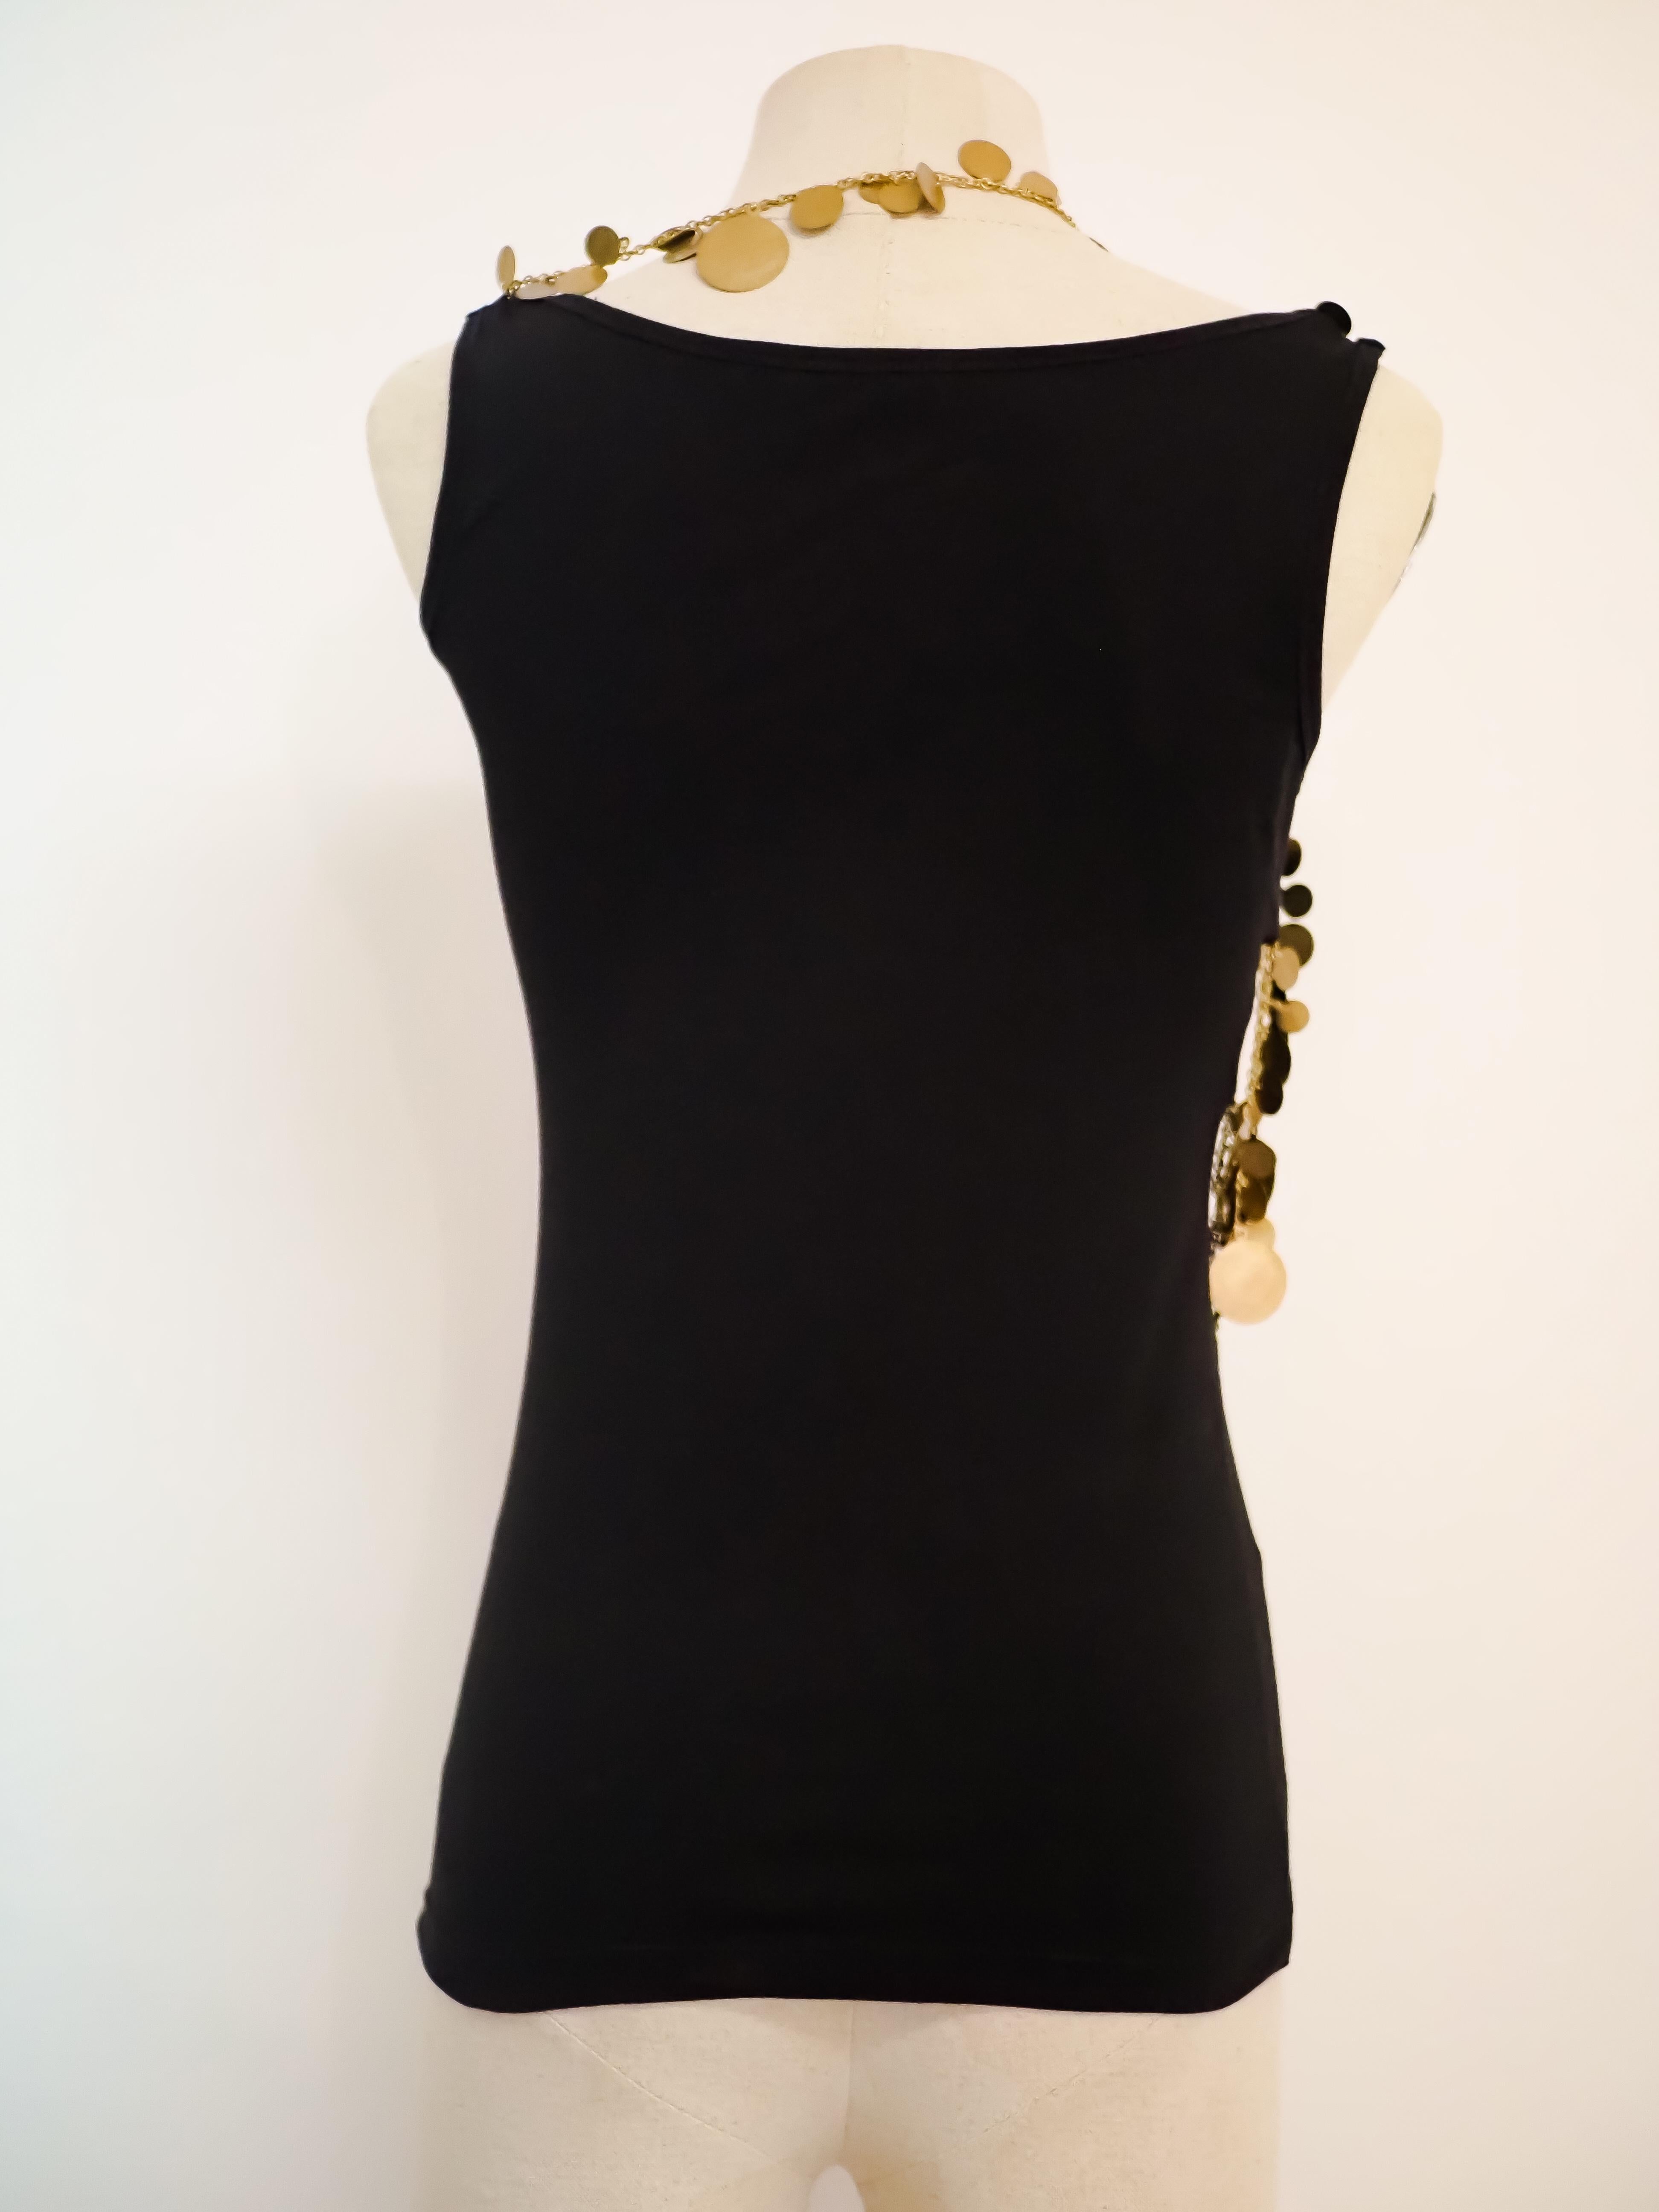 Women's Givenchy black tank top with gold medals all over For Sale